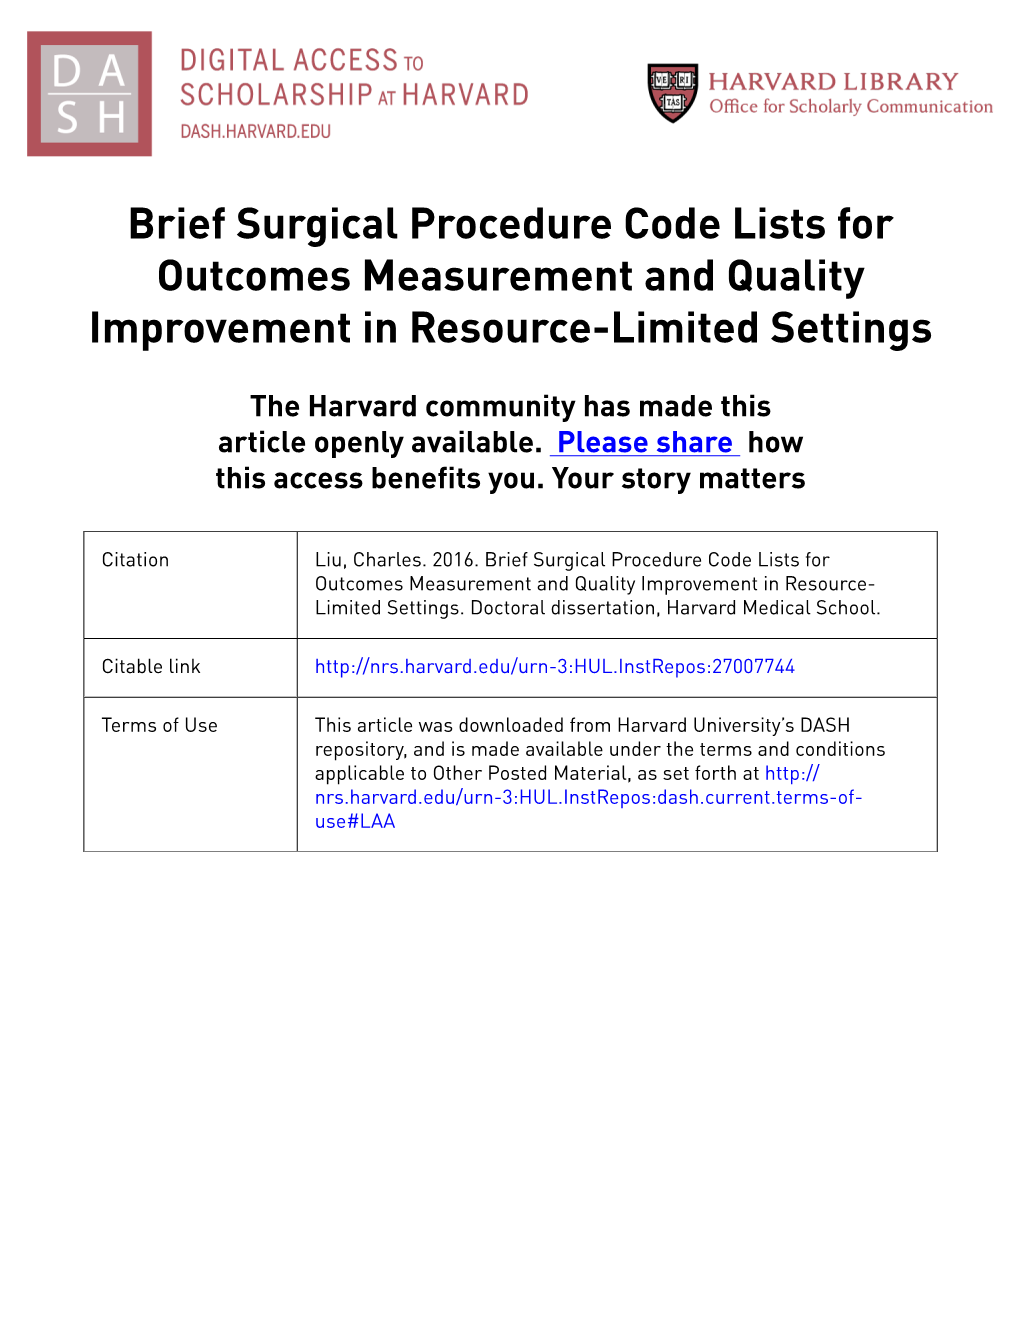 Brief Surgical Procedure Code Lists for Outcomes Measurement and Quality Improvement in Resource-Limited Settings